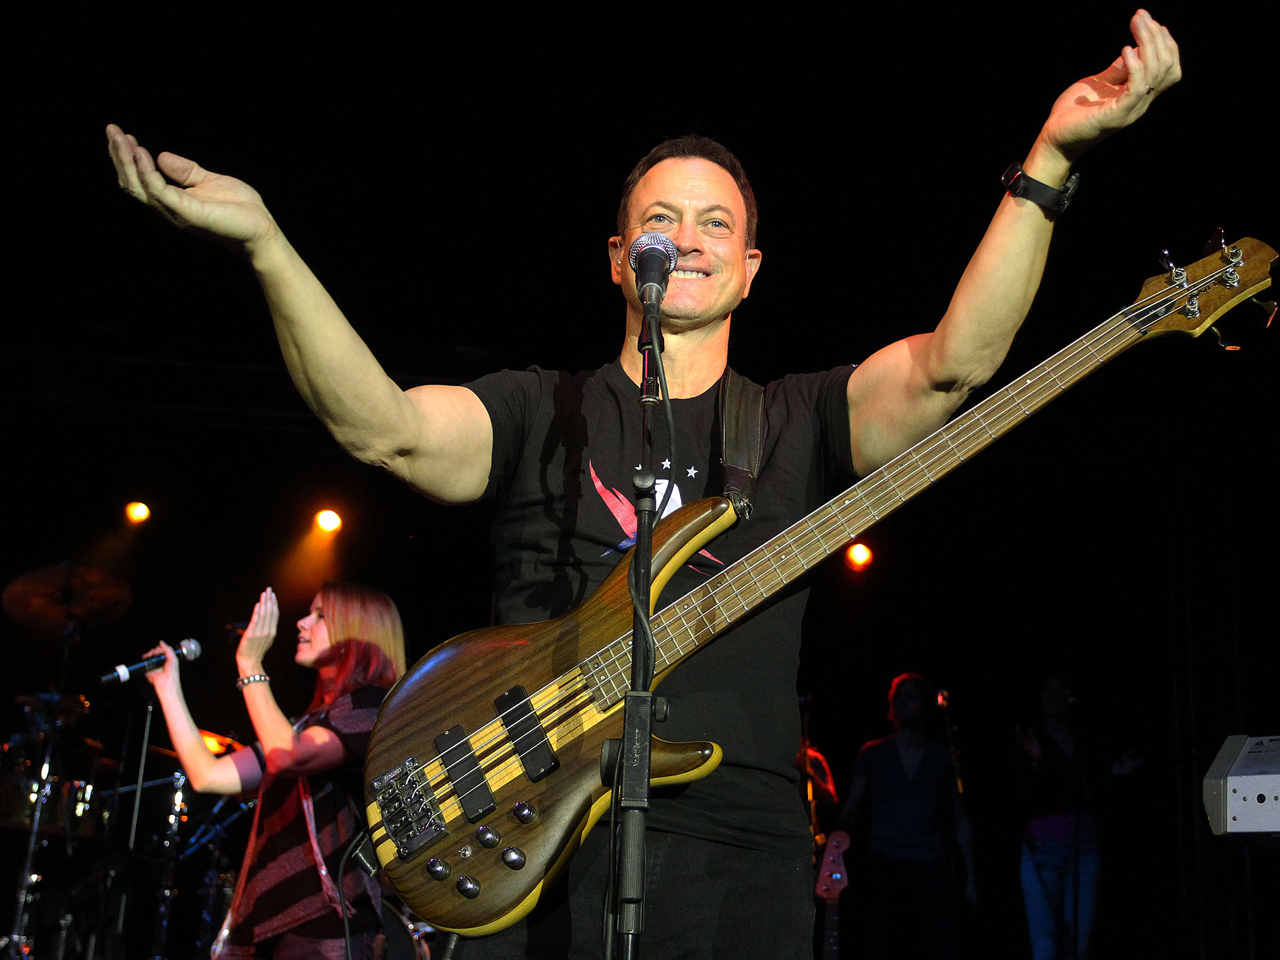 Gary Sinise builds homes and hope for wounded veterans - CBS News